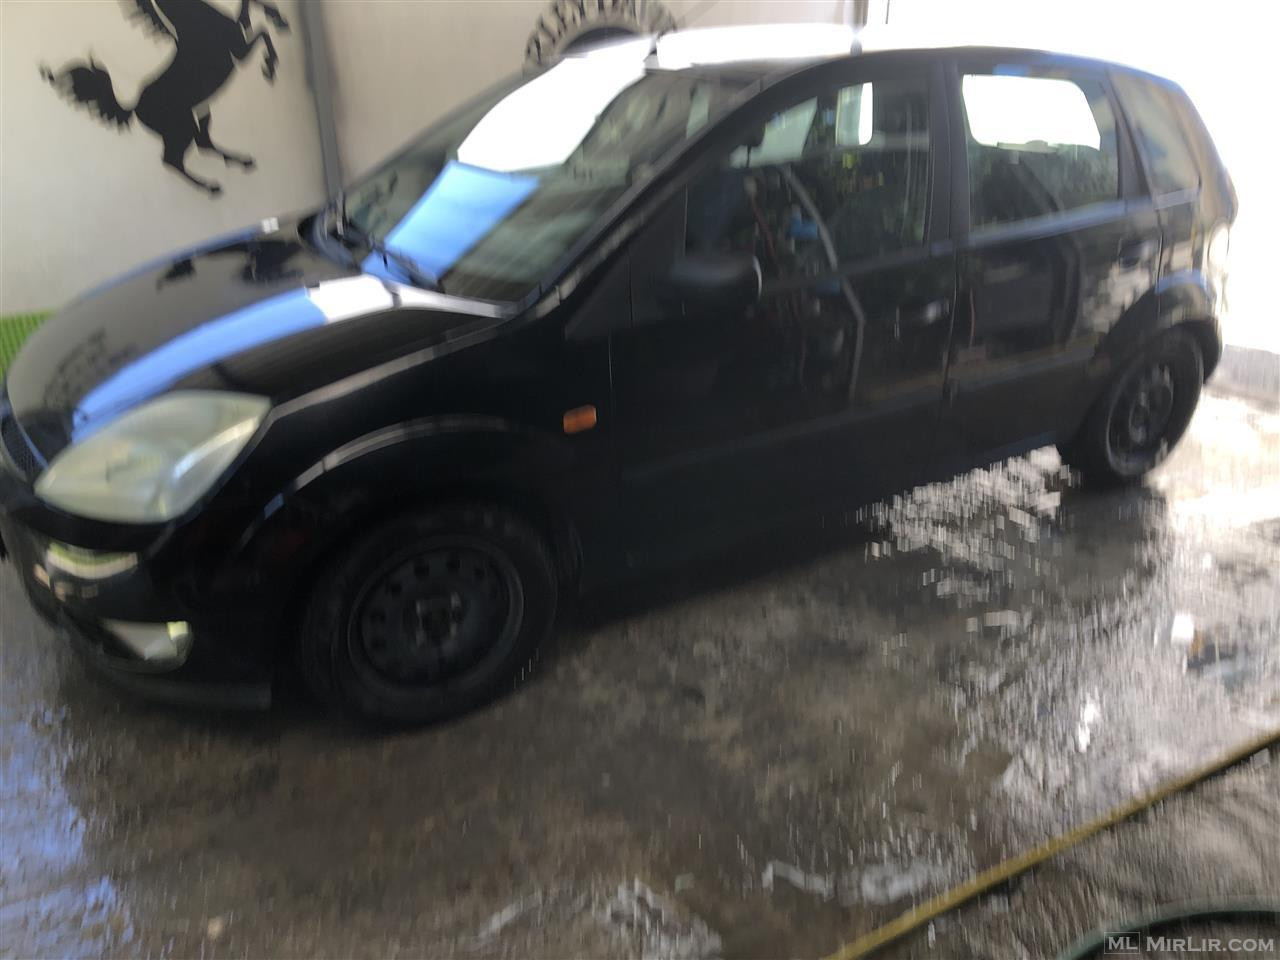 Shes ford fiesta 1.4 2002